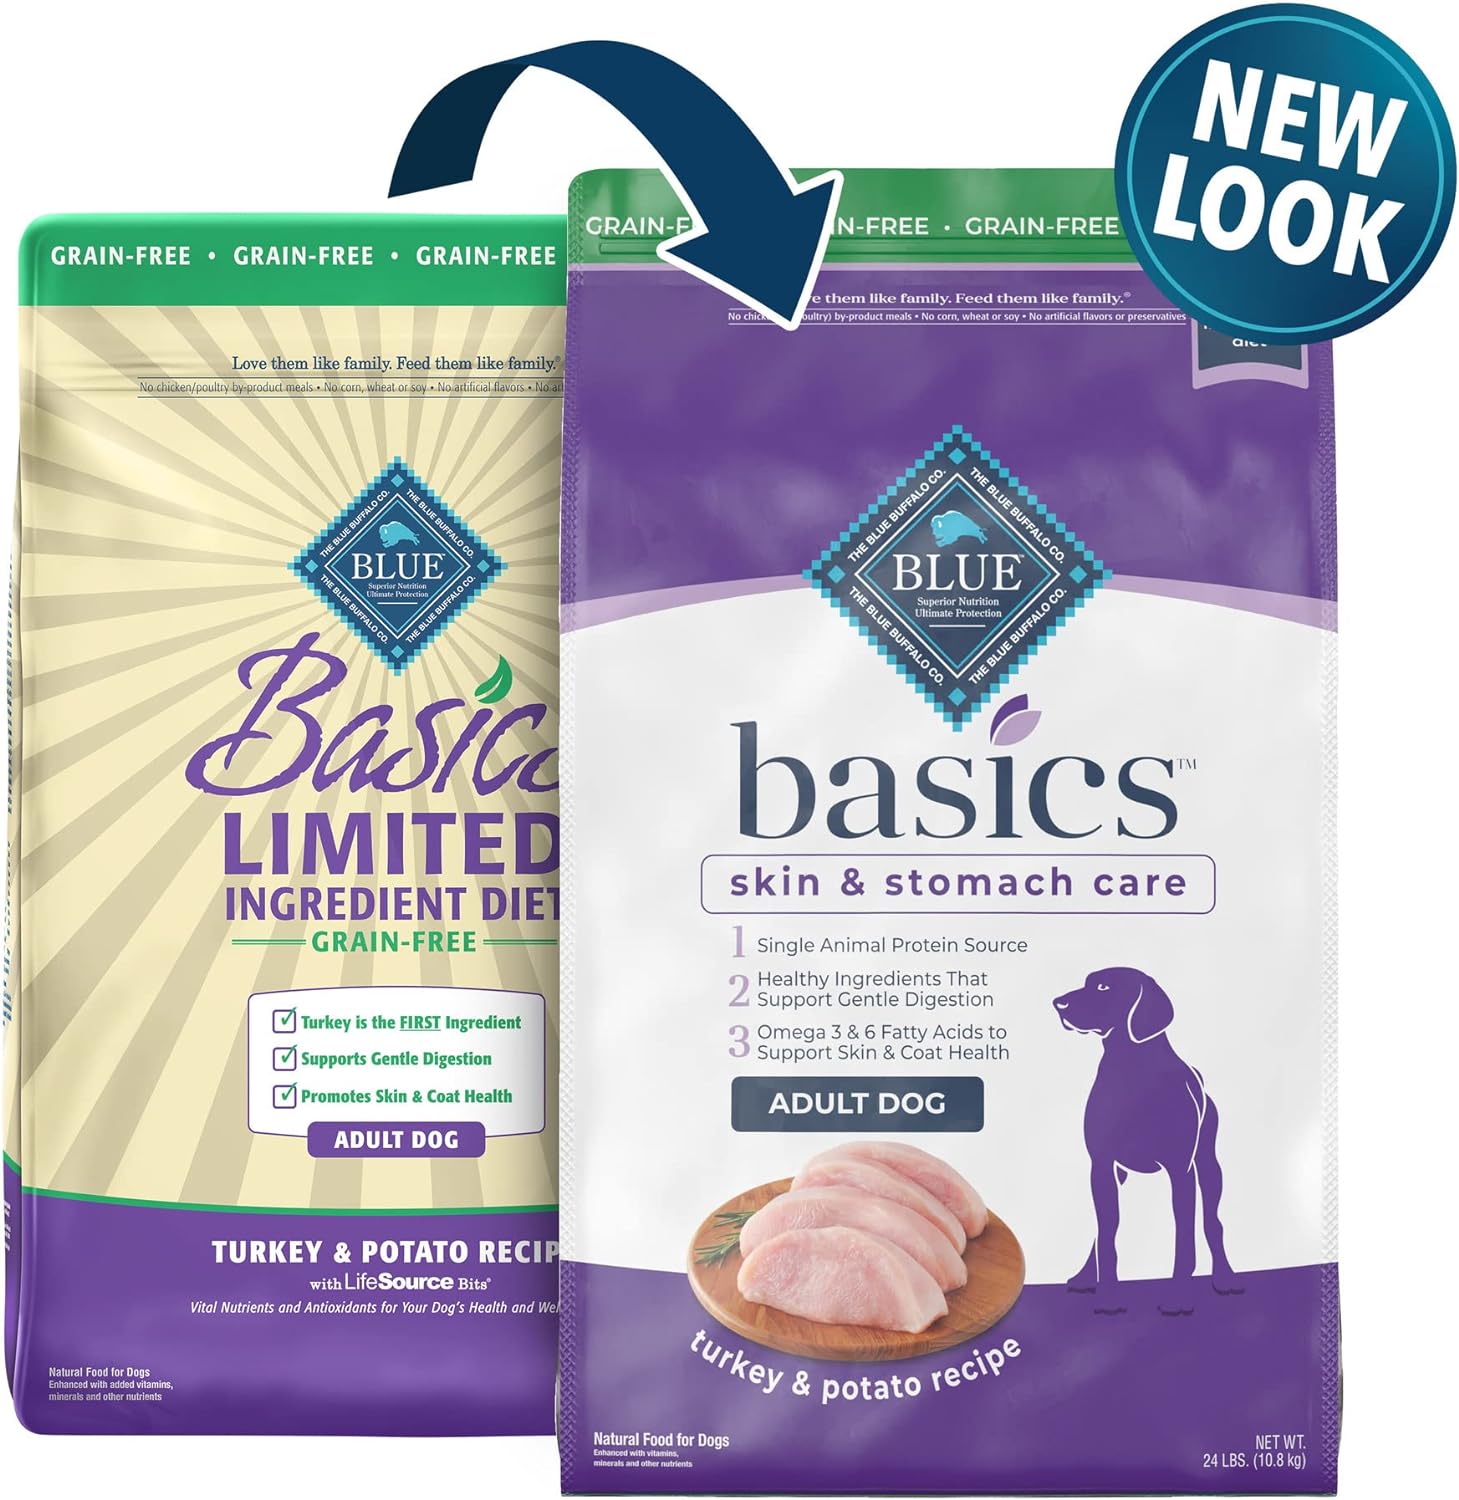 Blue Basics Limited Ingredient Diet Adult Grain-Free Turkey and Potato Recipe Dry Dog Food – Gallery Image 2